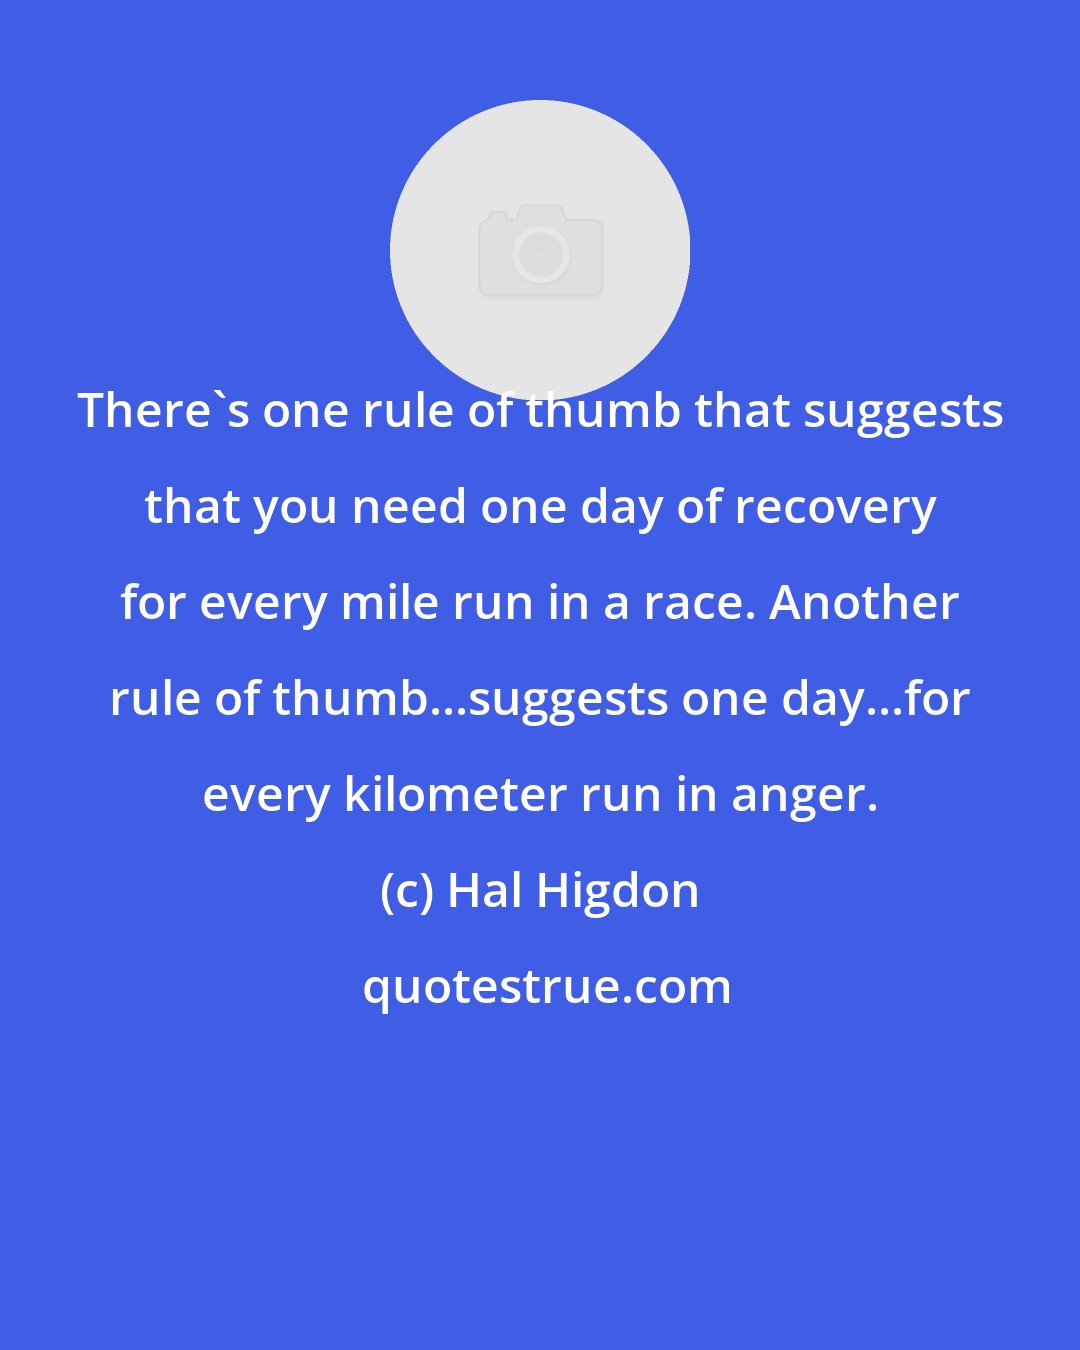 Hal Higdon: There's one rule of thumb that suggests that you need one day of recovery for every mile run in a race. Another rule of thumb...suggests one day...for every kilometer run in anger.